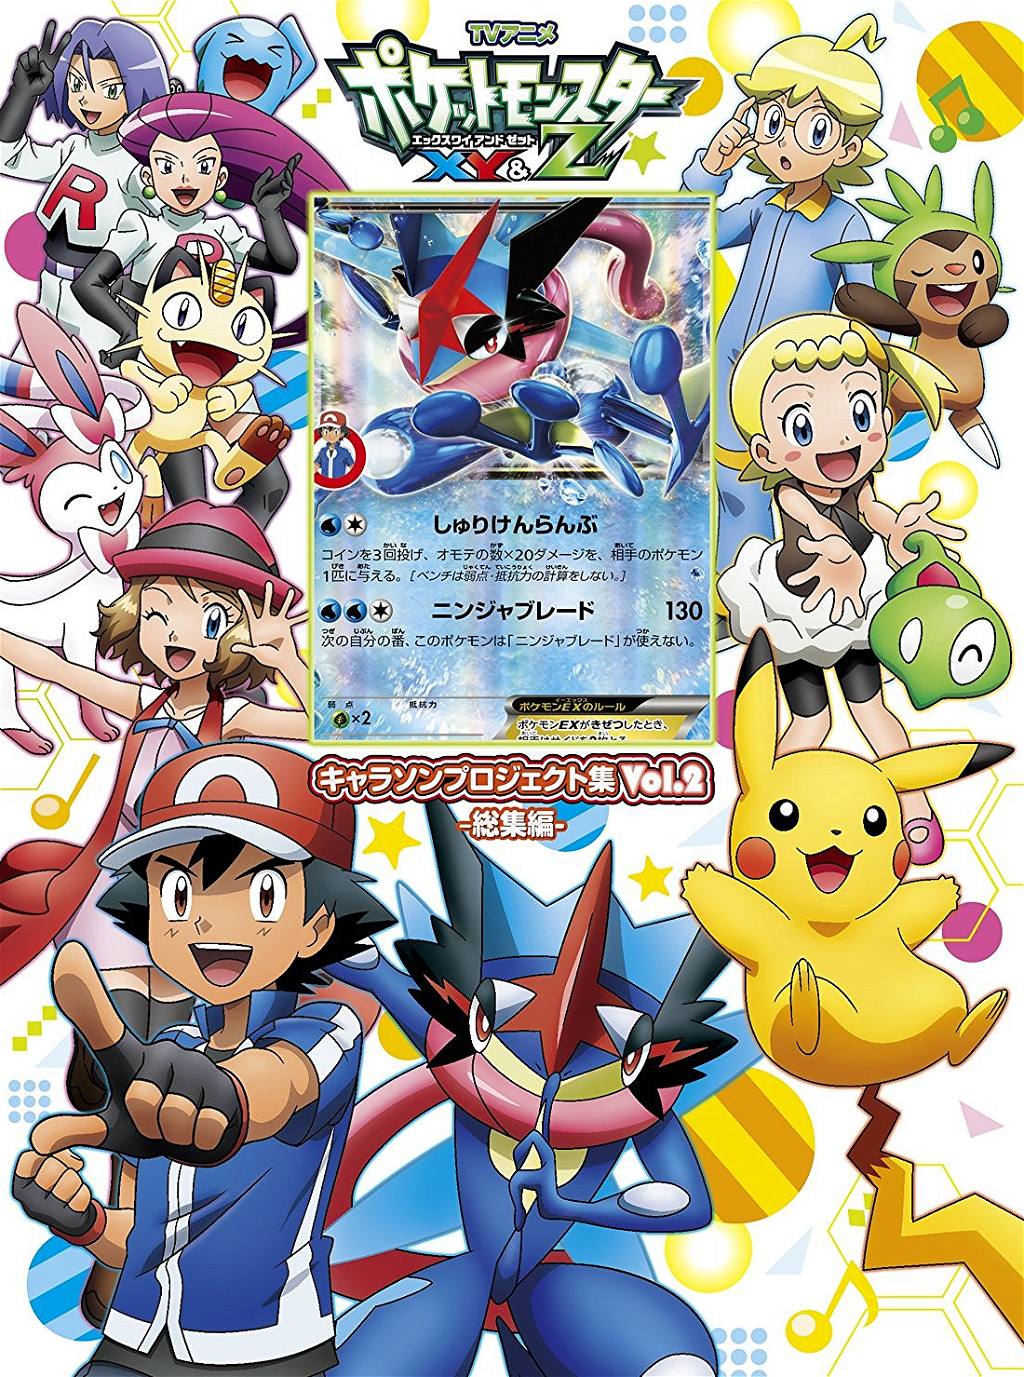 Pokemon Xy And Z Character Song Project Shu Vol 2 Soushuu Hen Cd Dvd Limited Edition Type B Pokemon Xy And Z